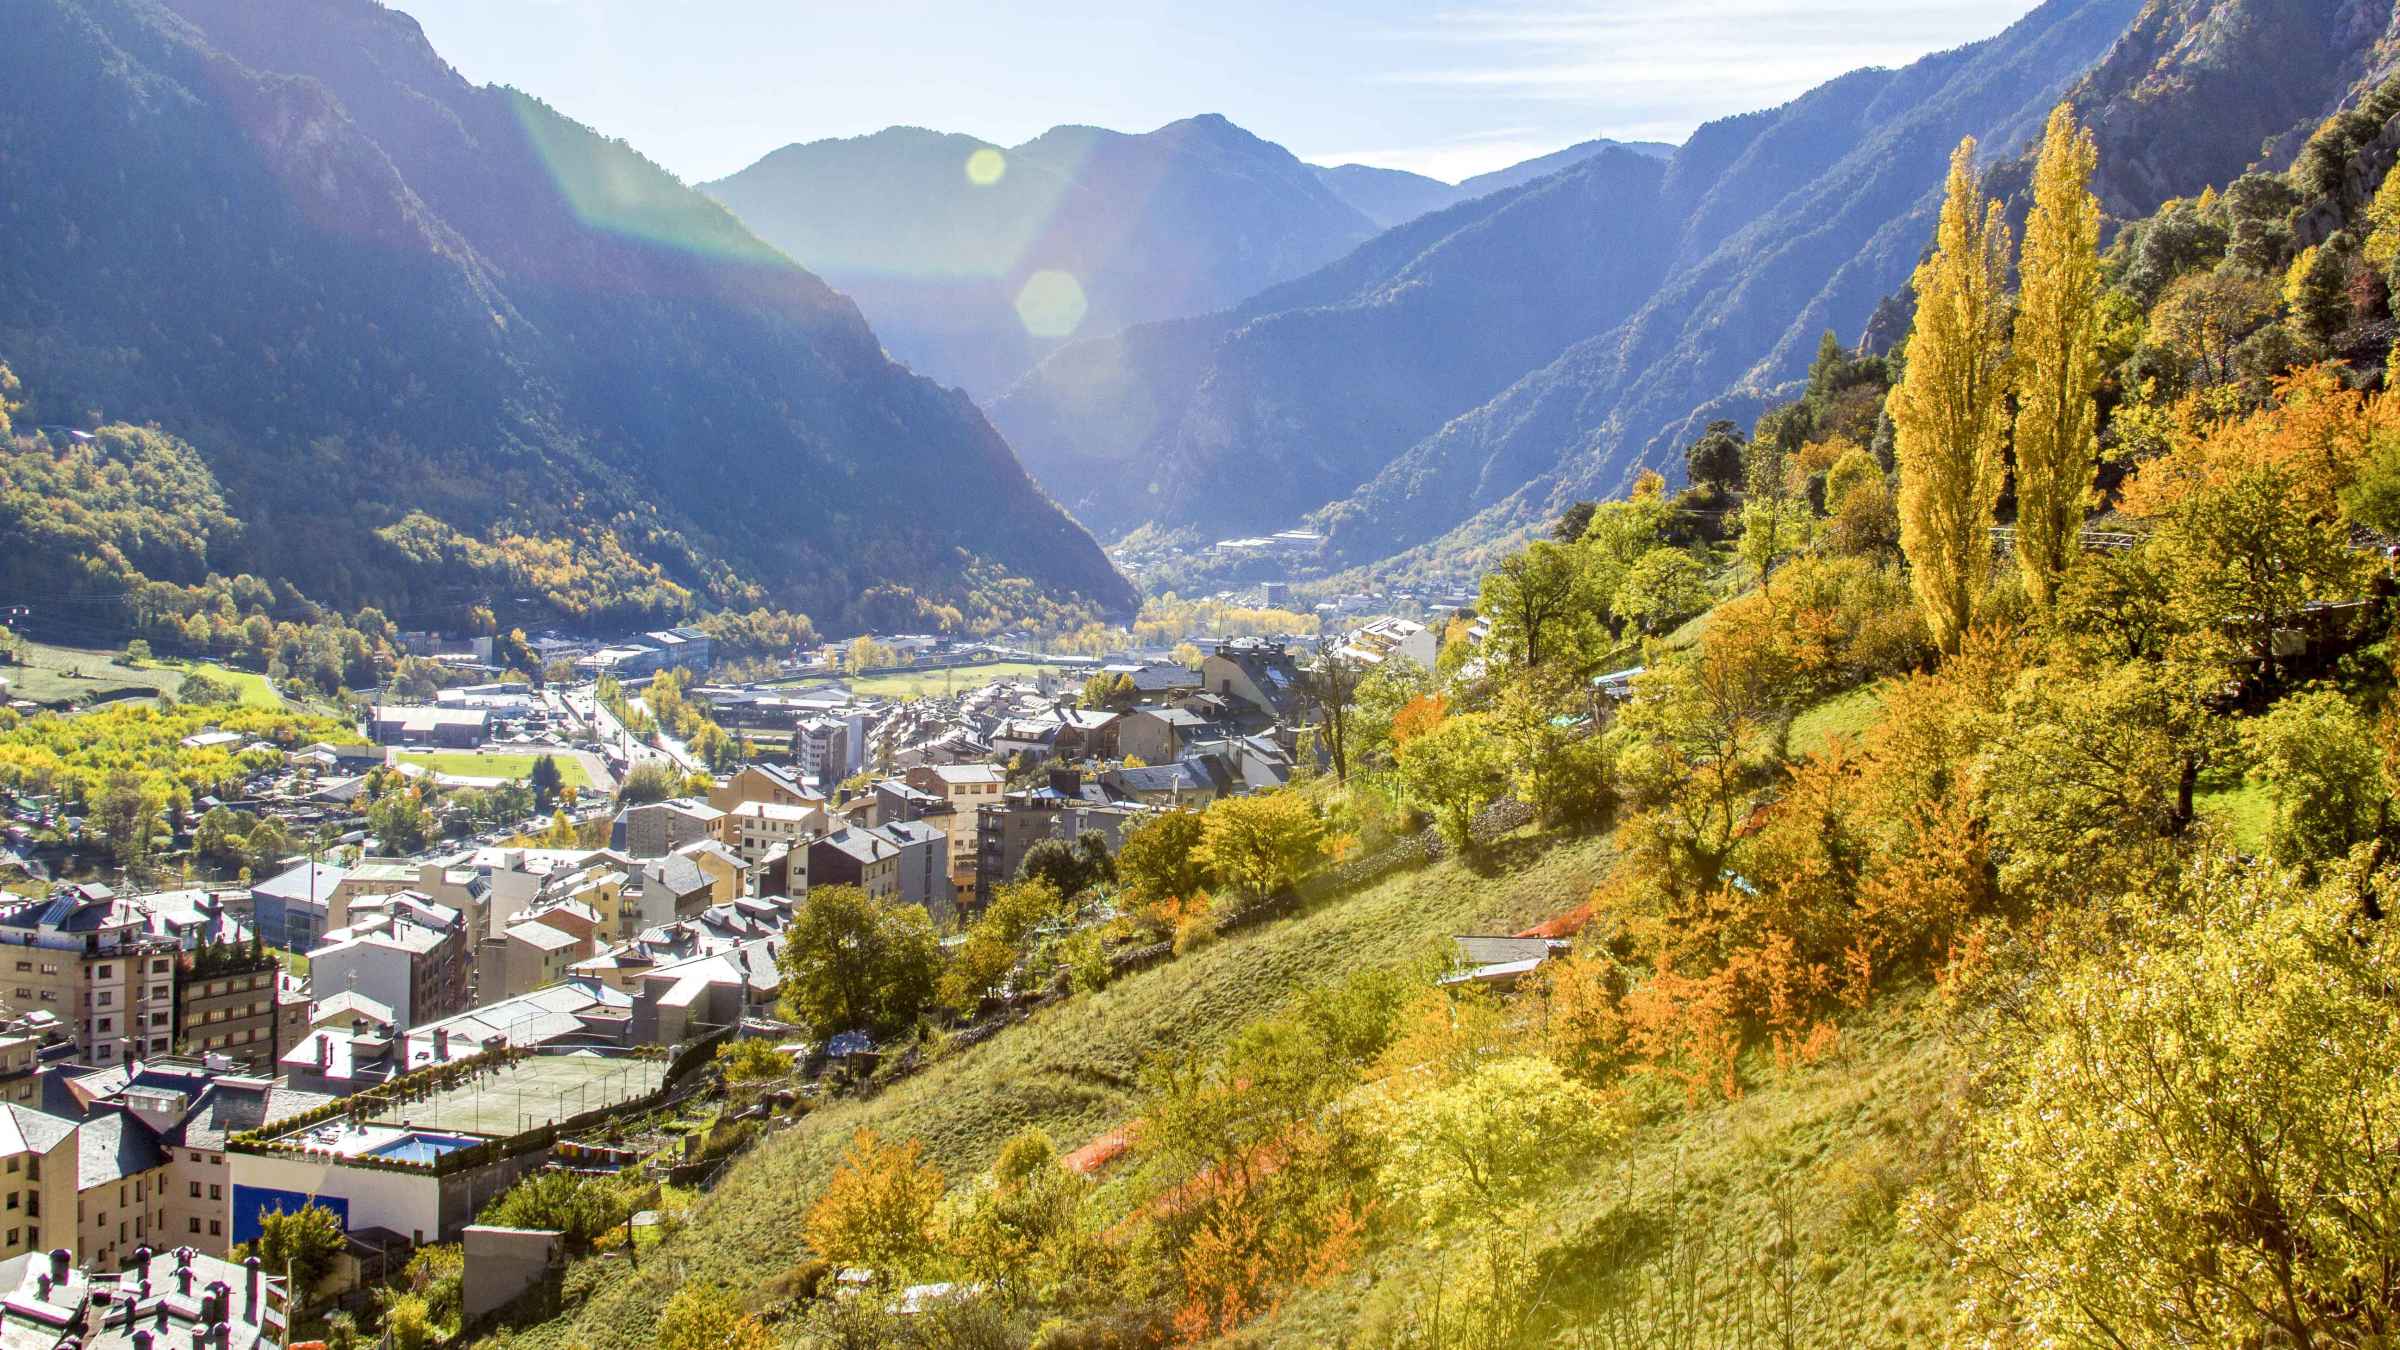 Andorra 2022: Top 10 Tours, Trips & Activities (with Photos) - Things to Do  in Andorra | GetYourGuide